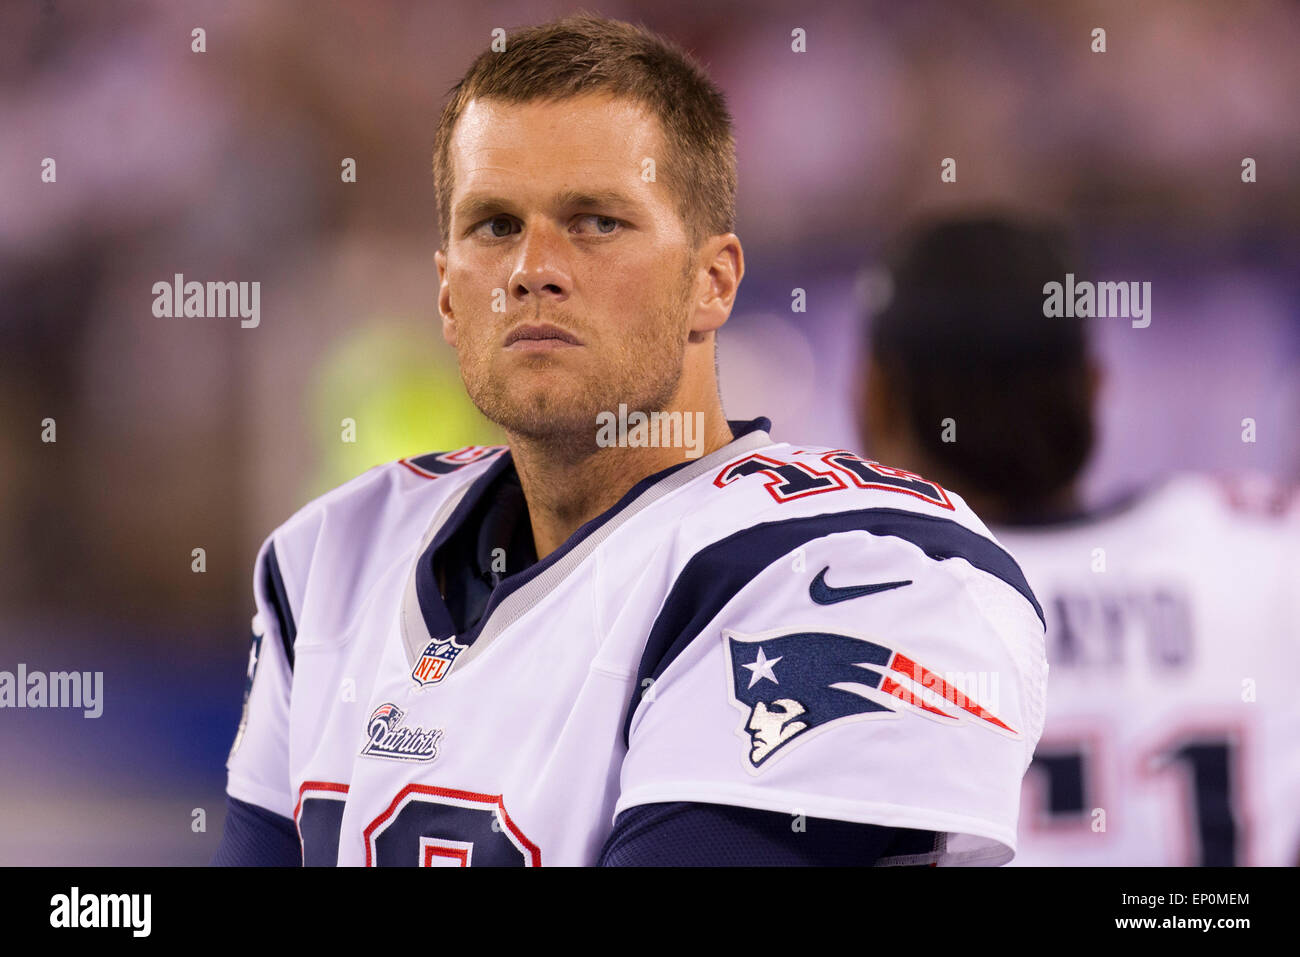 File Photo. 11th May, 2015. New England Patriots quaterback Tom Brady (12) suspended four games for punishment deflating footballs in the AFC Championship game. Pictured: May 11, 2015 - FILE PHOTO - New England Patriots quaterback Tom Brady (12) suspended four games for punishment deflating footballs in the AFC Championship game. Pictured: August 29, 2012: New England Patriots quarterback Tom Brady (12) looks on with his helmet off during the NFL preseason game between the New England Patriots and the New York Giants at MetLife Stadium in East Rutherford, New Jersey. © csm/Alamy Live News Stock Photo